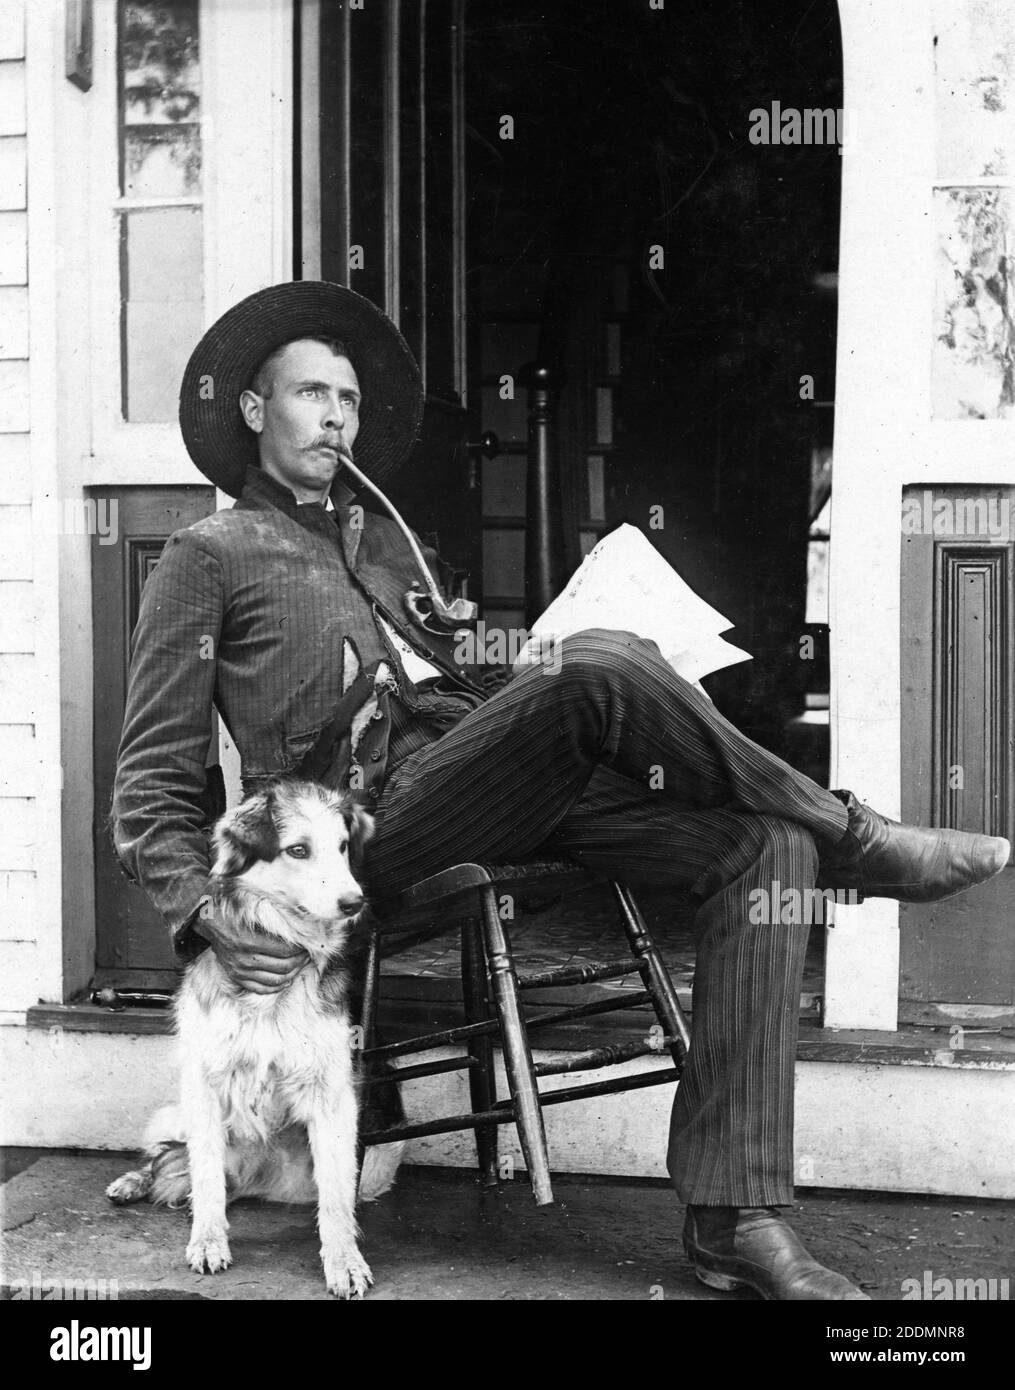 Probably in the 1880s, this laidback young man, perhaps in his 30s, sits on his back-tilted chair, with his right hand on his pet dog. He seems to be thinking about something relaxing. Taking a break from reading his newspaper, the man is smoking a curved, long-stemmed pipe that has a figure (maybe a monkey) carved below the tobacco bowl.   To see my other homey-related images, Search:  Prestor  vintage  home  [or  pet] Stock Photo